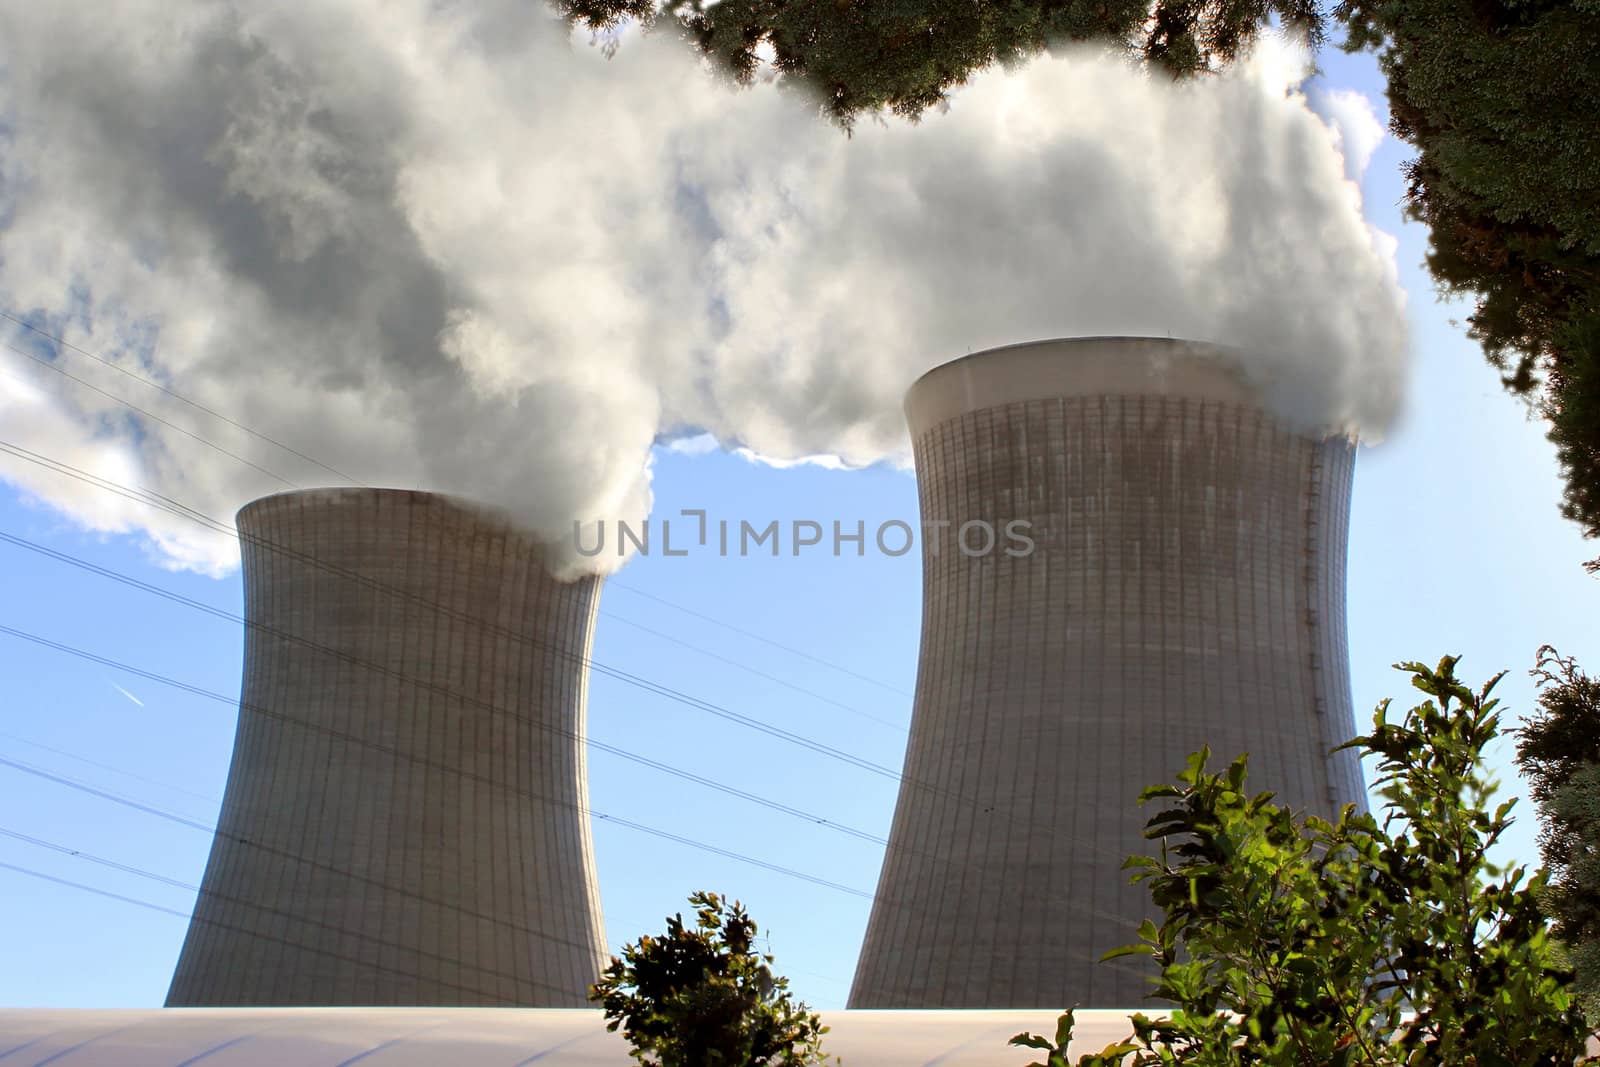 Chimneys of a nuclear power plant for renewable energy